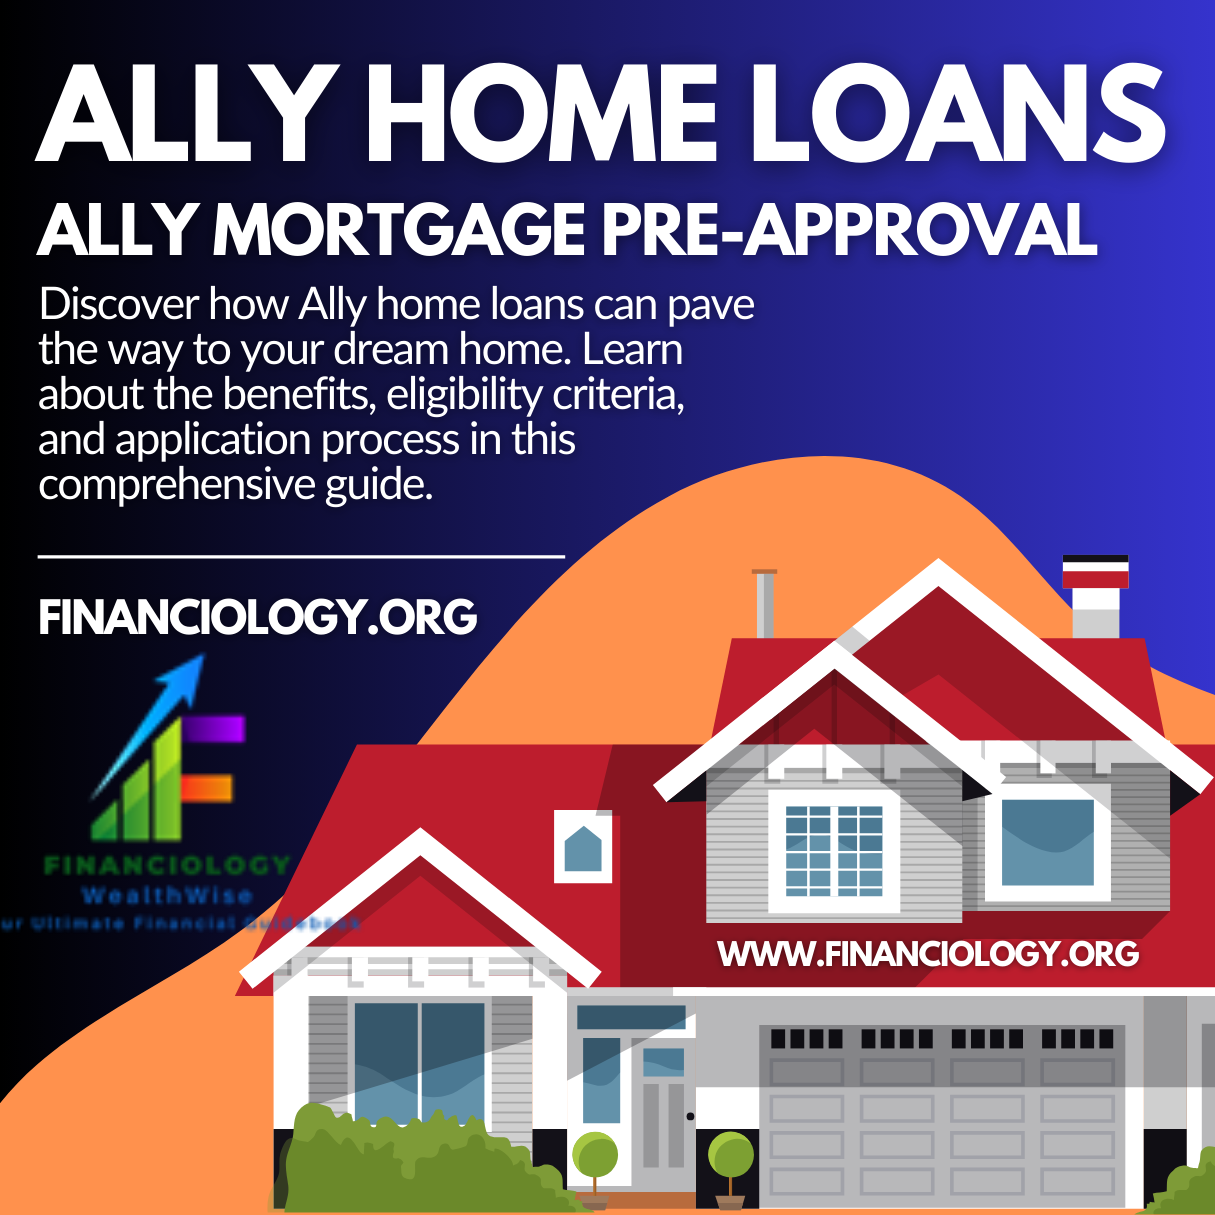 Ally home loans; Ally Bank; Ally Mortgage; Mortgage Pre-approval; Ally Financial Services;